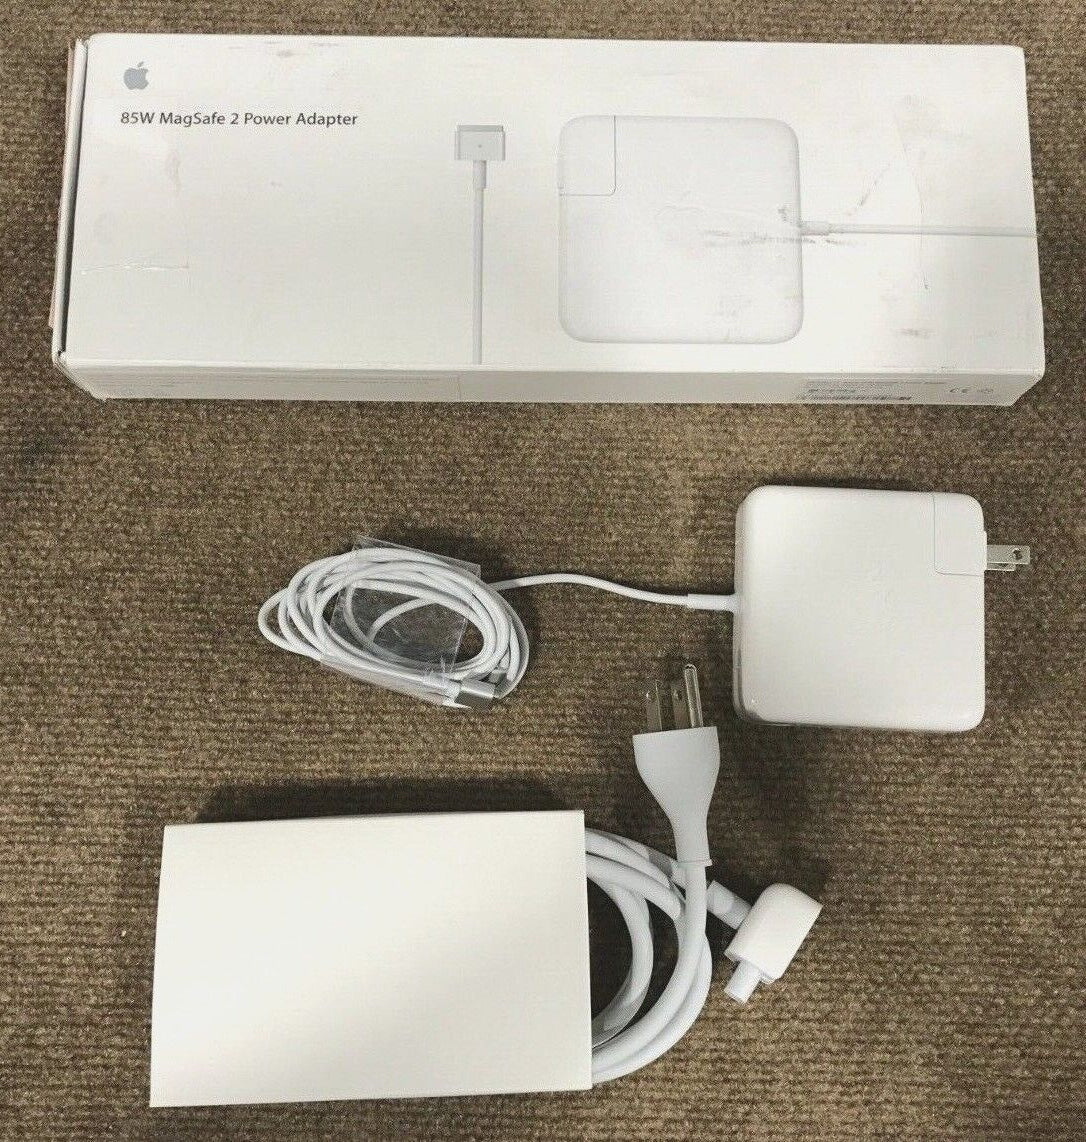 grave sundhed artilleri ♥ New, Open Box - Apple 85W Magsafe 2 Power Adapter MD506LL/A – Small Dog  Electronics